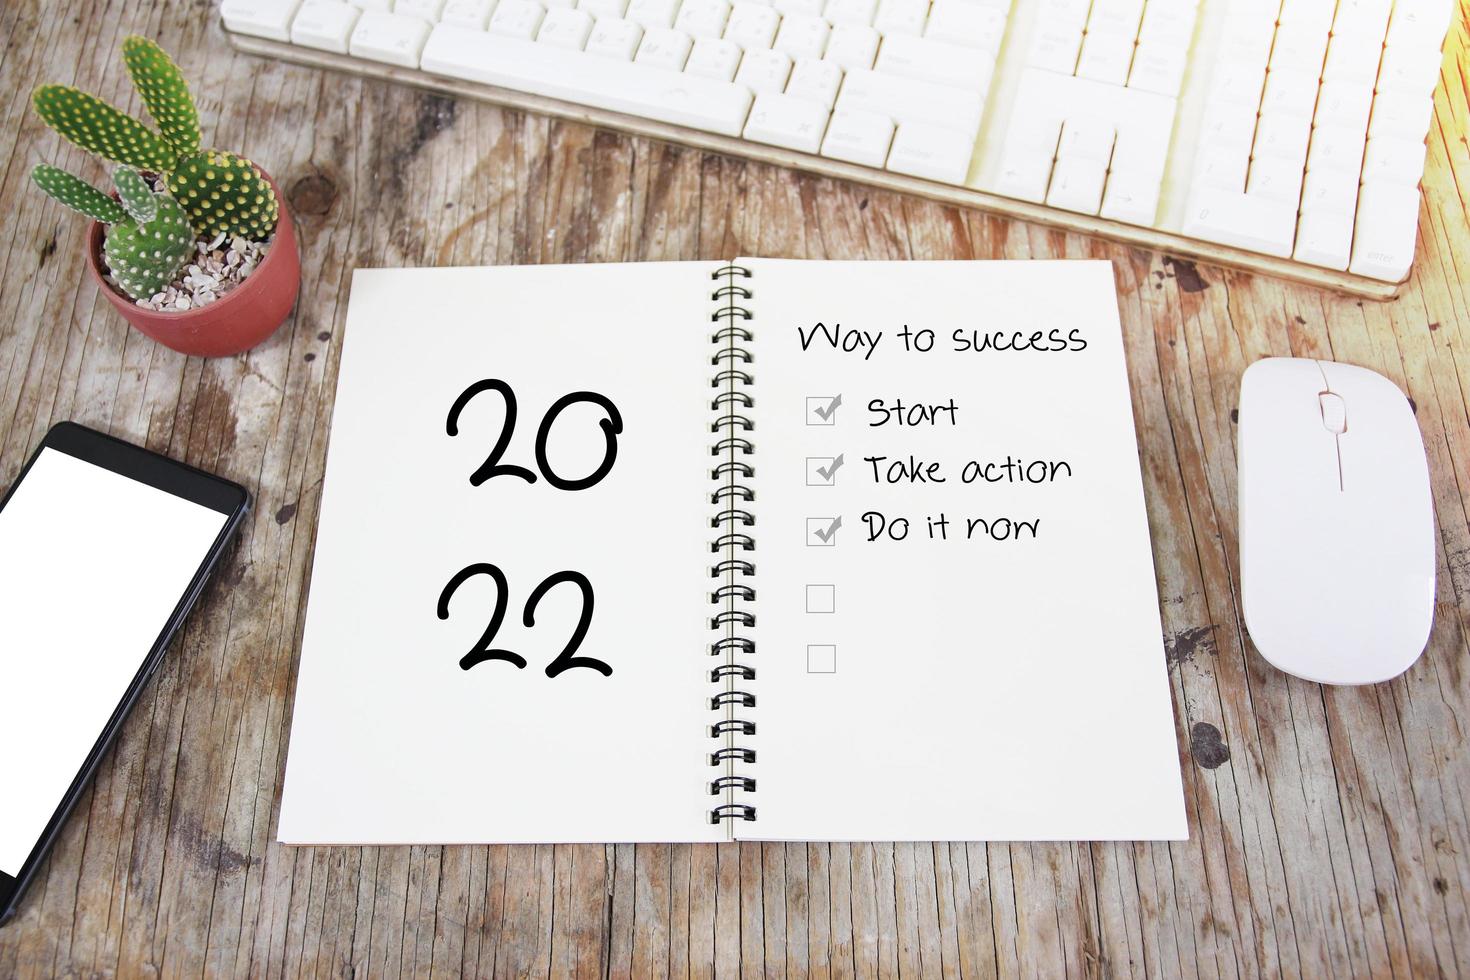 New year resolution goals list way to success 2020 photo